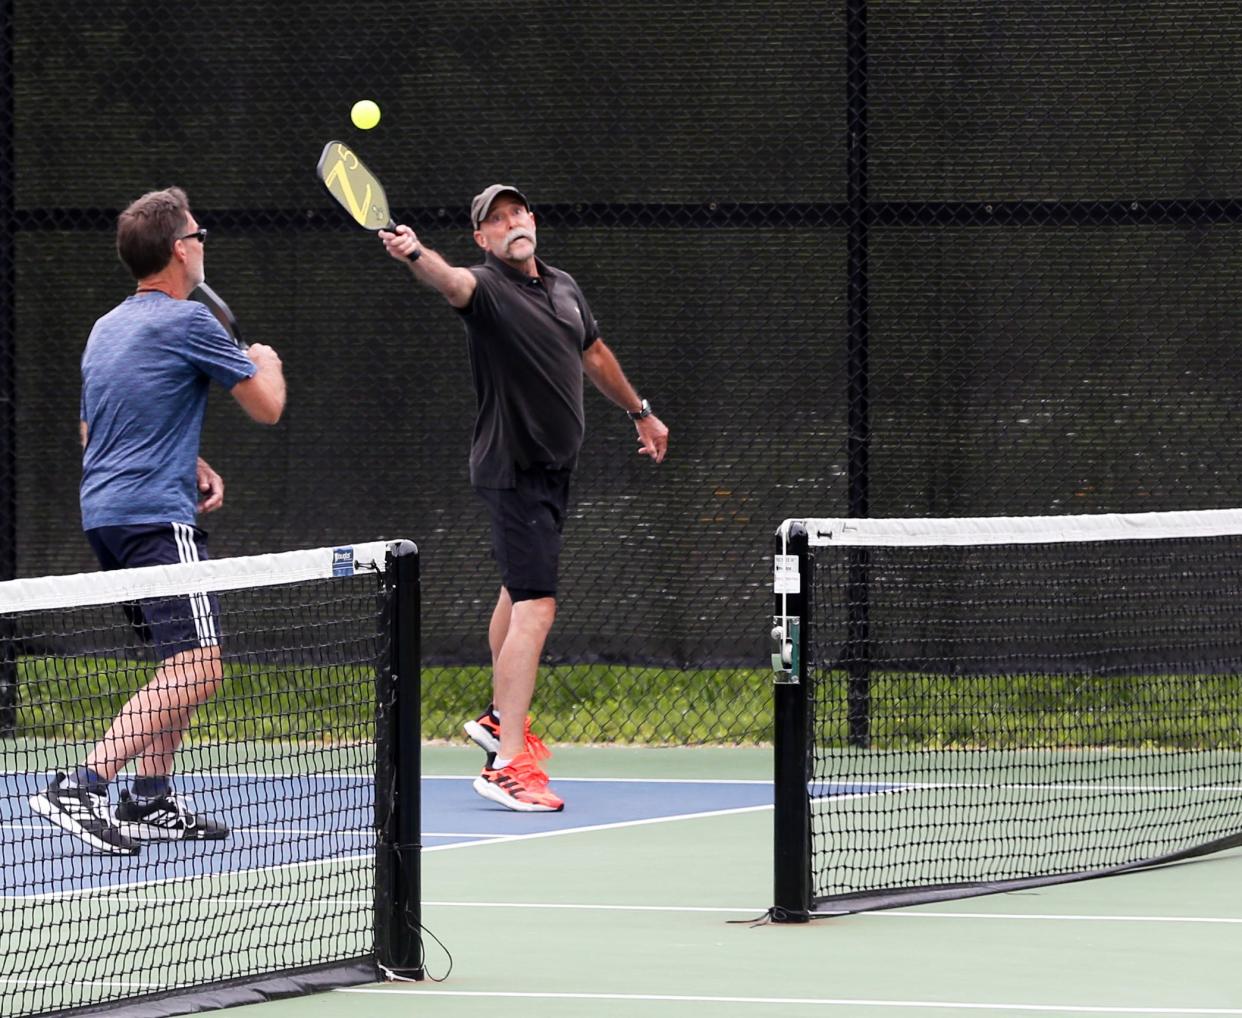 York Paddle Tennis and Pickleball Club members enjoy some competition on the courts at Mill Lane in York May 31, 2022.